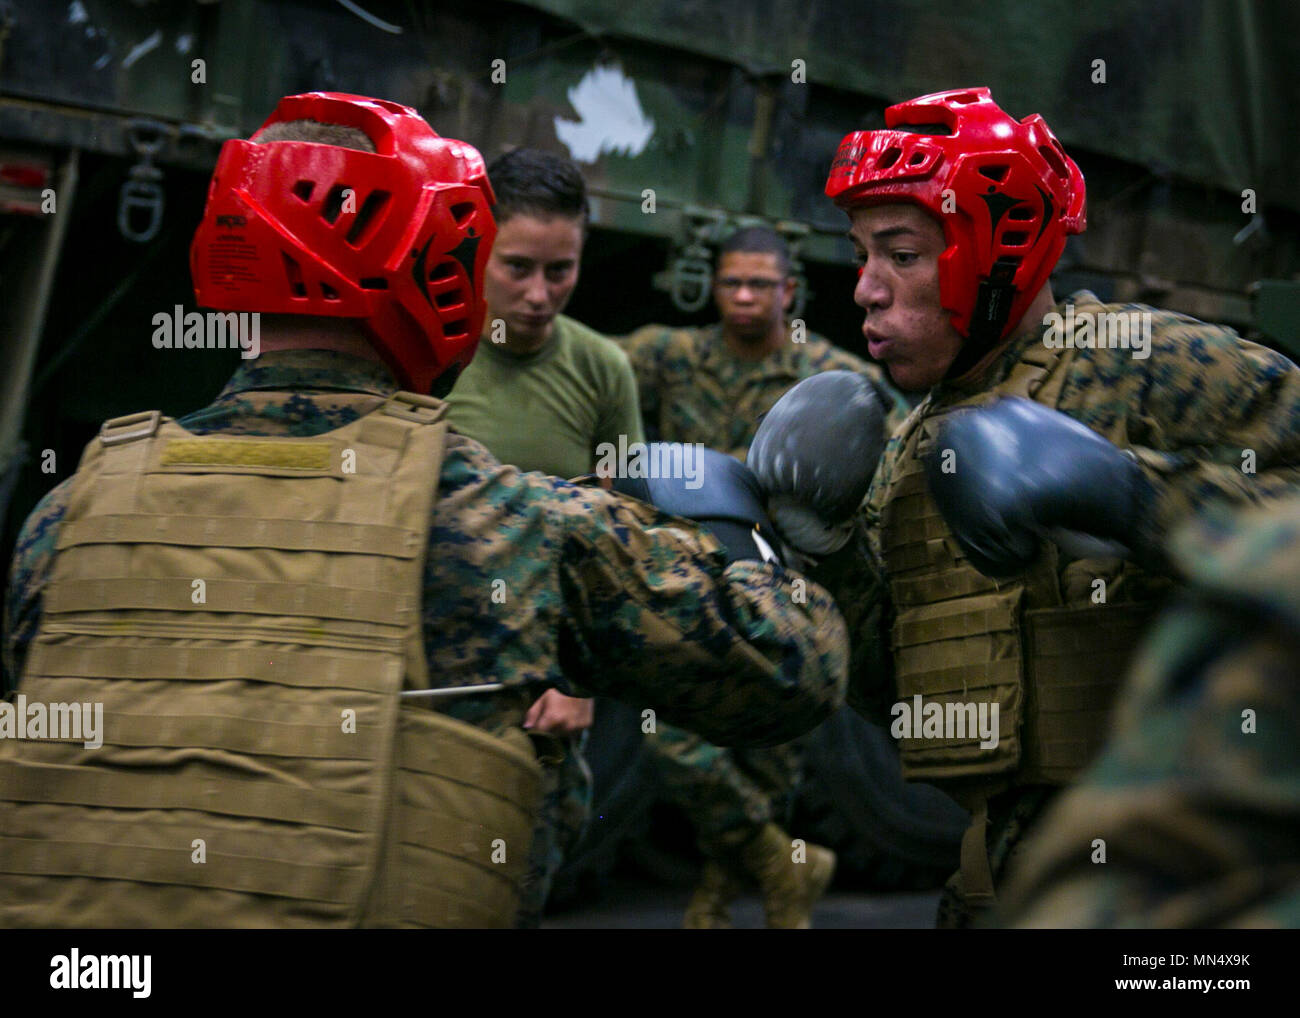 PACIFIC OCEAN – Marines with the 15th Marine Expeditionary Unit’s Logistics Combat Element box as part of their combat conditioning portion during a Marine Corps Martial Arts Program course held aboard USS Pearl Harbor (LSD 52), Aug. 9, 2017. MCMAP teaches Marines self-defense and submission techniques in order to be more effective during hand-to-hand combat. The 15th MEU and America Amphibious Ready Group are operating in the U.S. 7th Fleet area of operations to enhance partnerships and serve as a ready-response capability for any type of contingency.  (U.S. Marine Corps photo by Cpl. F. Cord Stock Photo